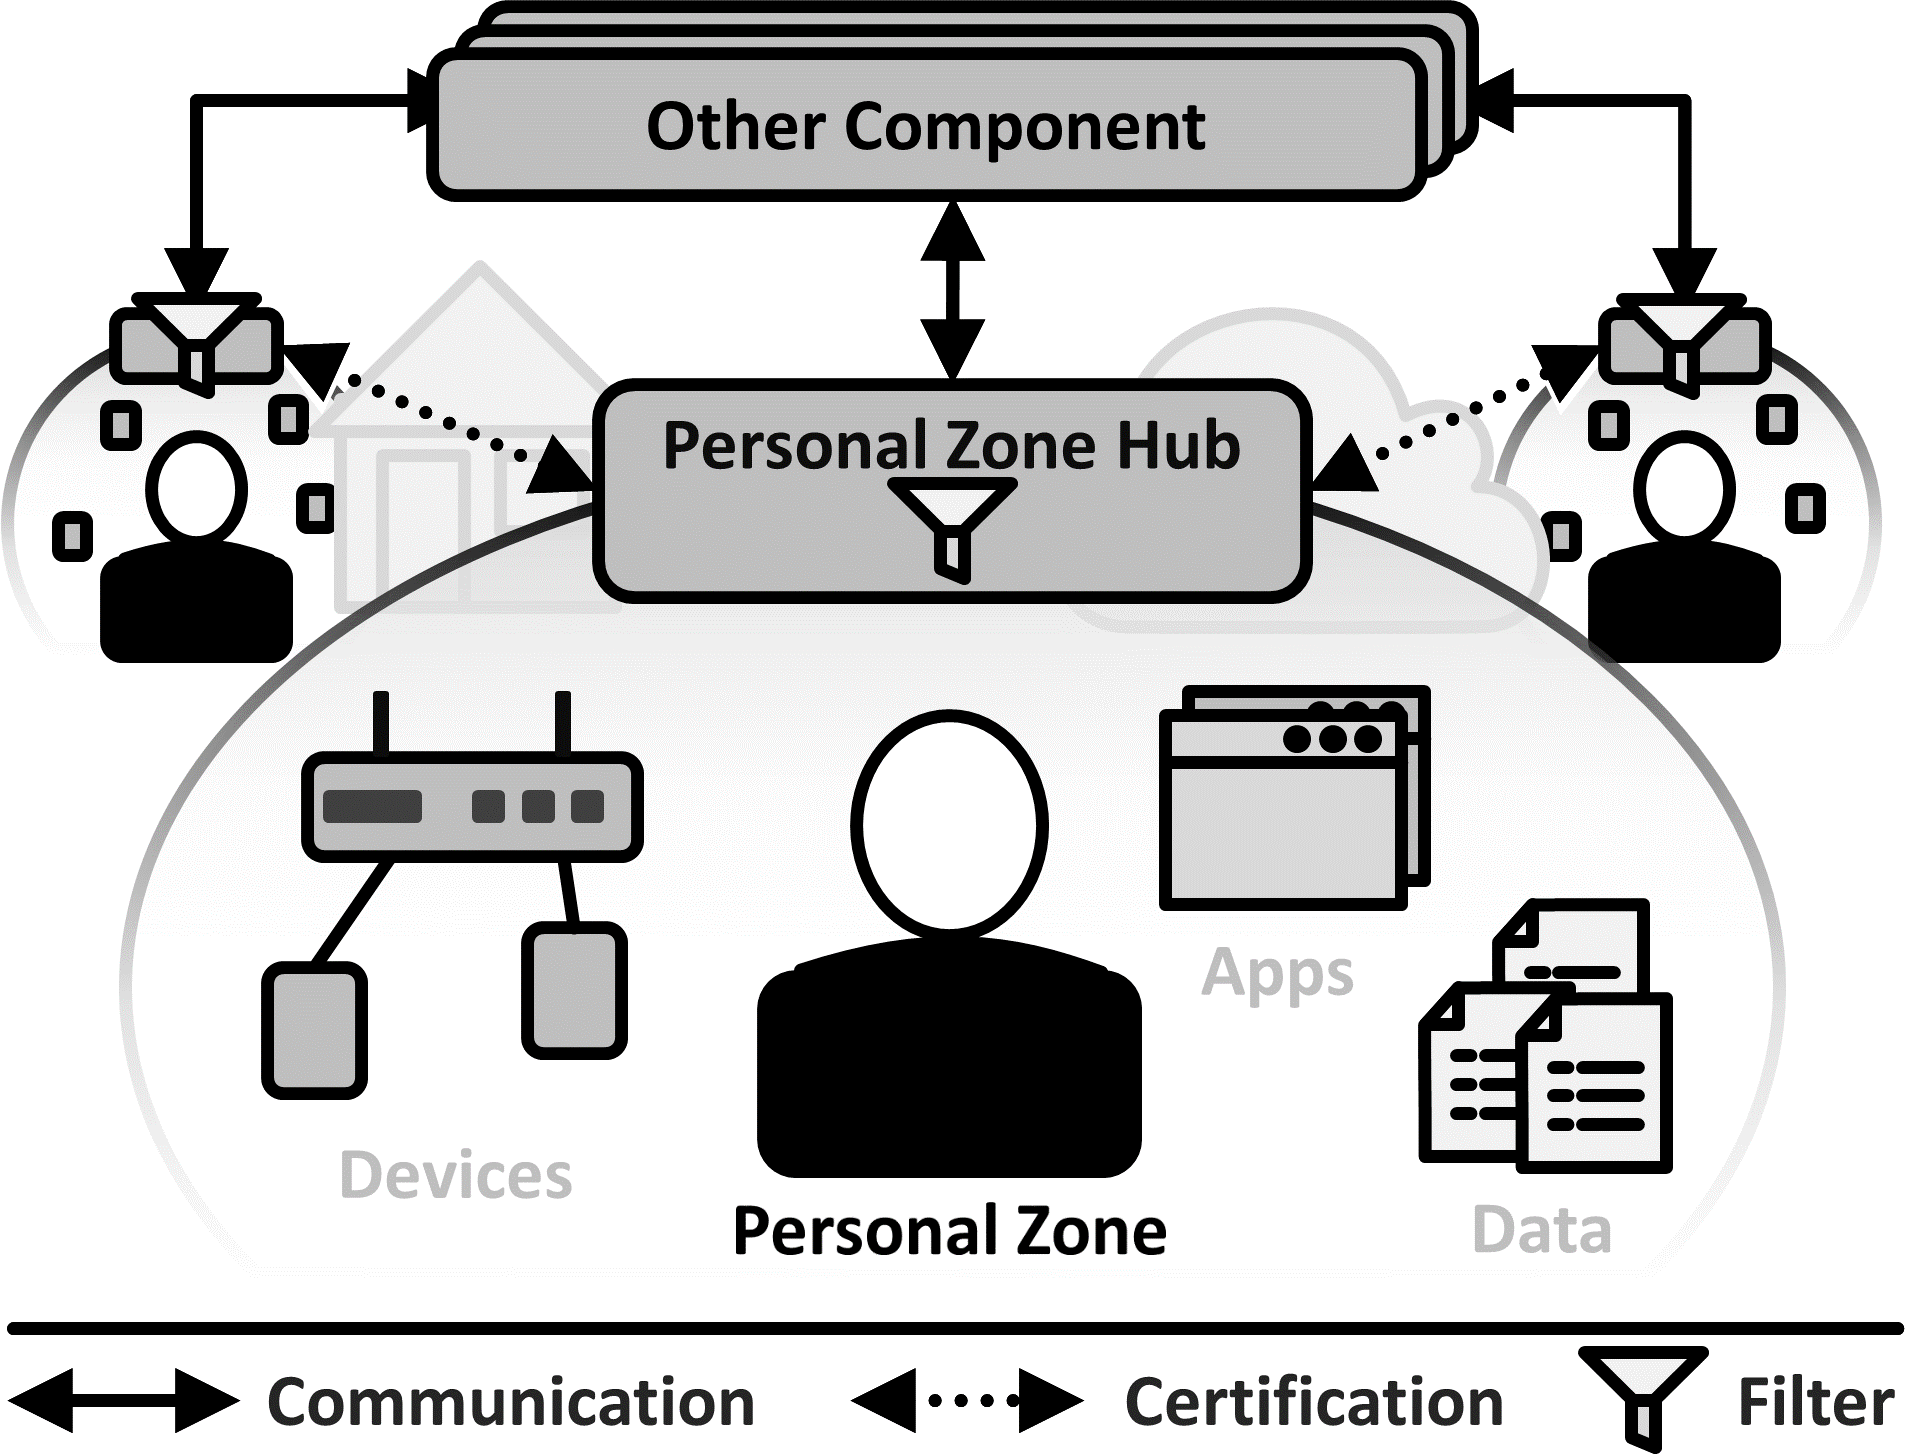 Solution sketch of the Personal Zone Hub pattern